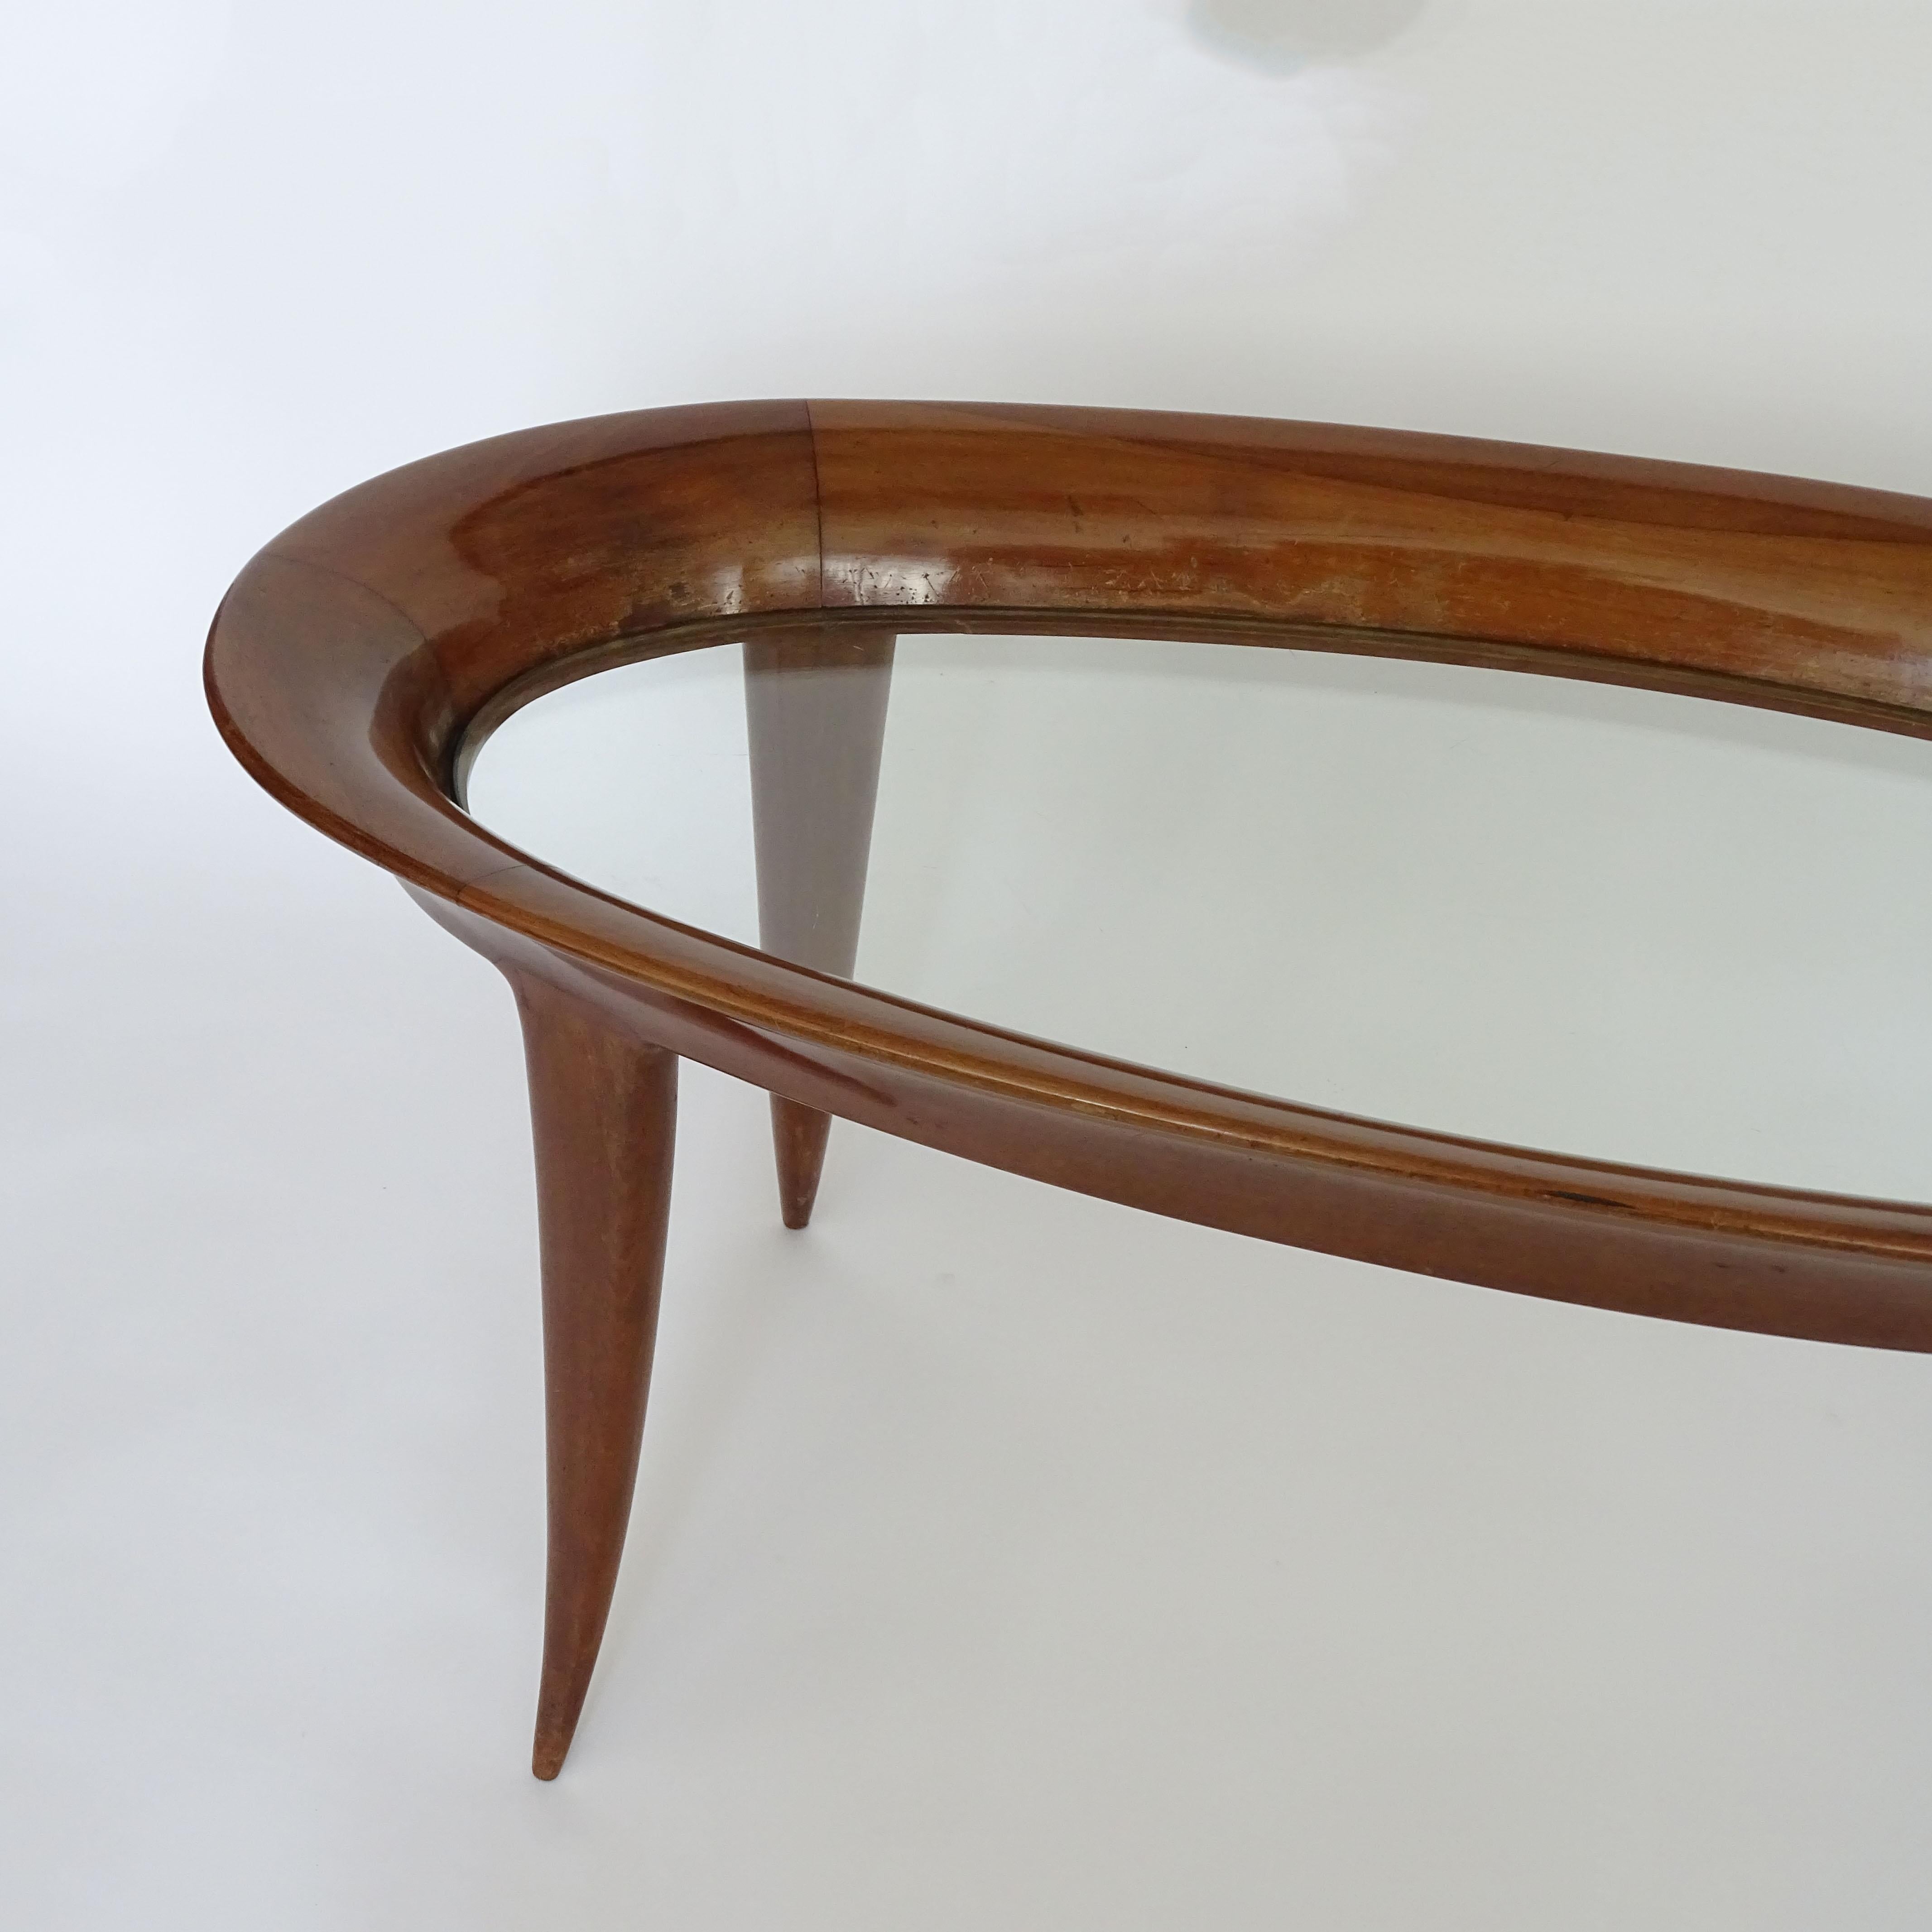 Glass Italian 1940s Sculpted Oval Coffee Table Attributed to Fontana Arte For Sale